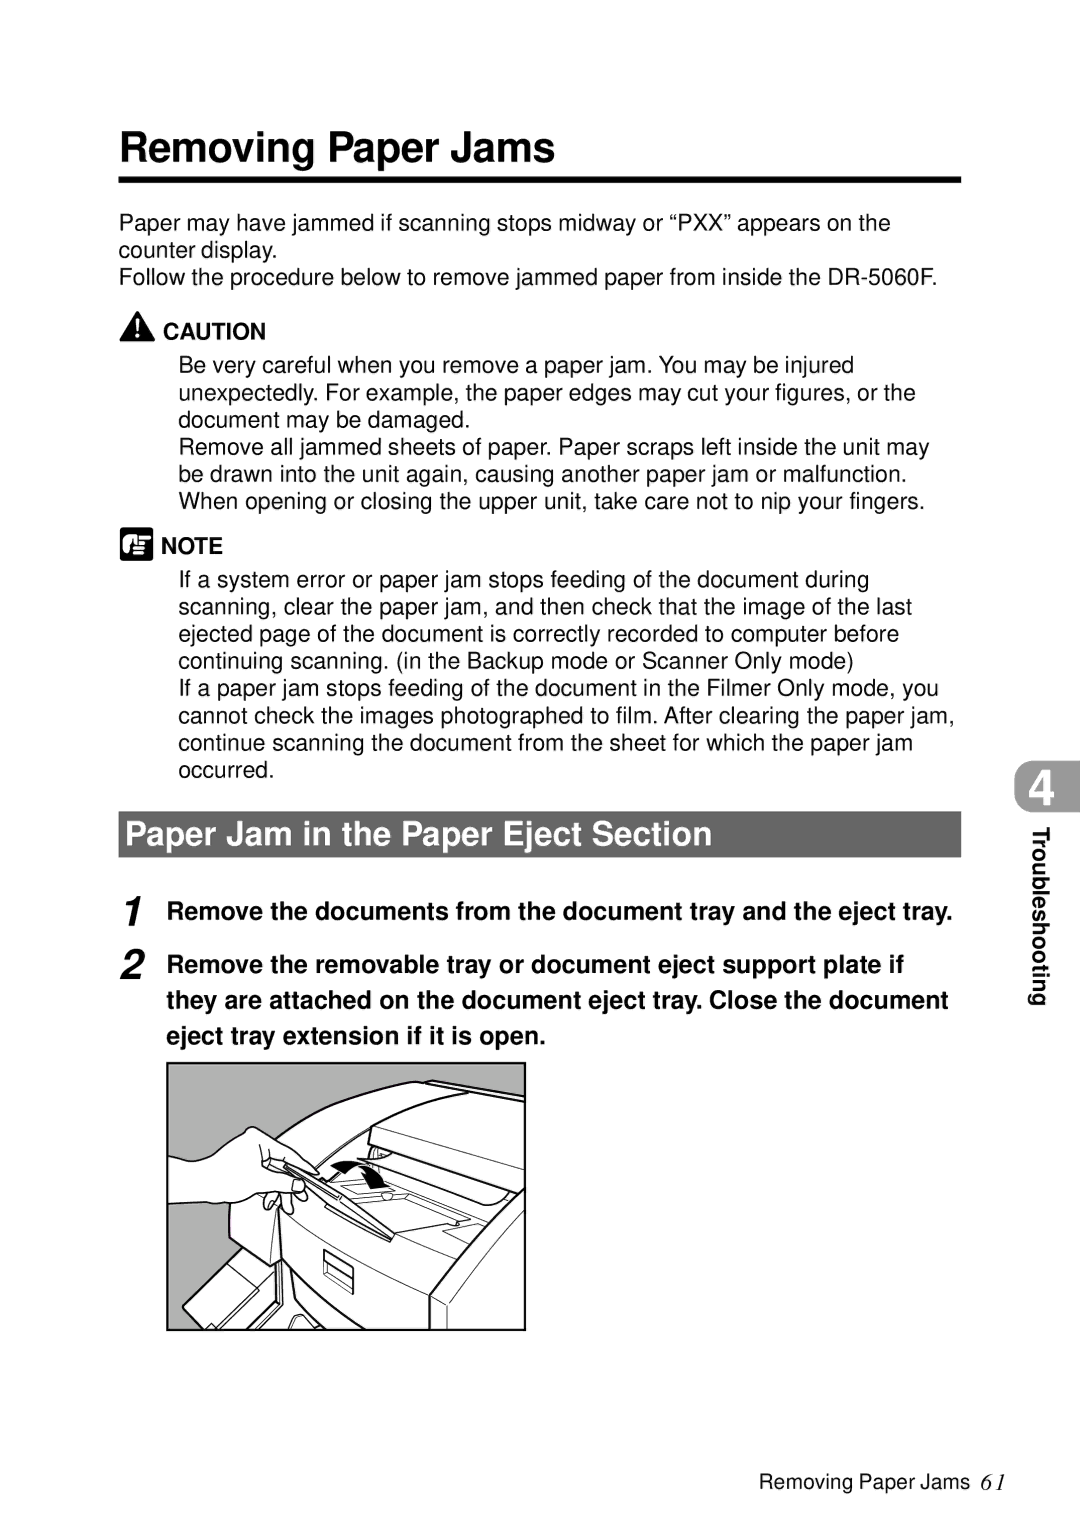 Canon DR-5060F manual Removing Paper Jams, Paper Jam in the Paper Eject Section, Eject tray extension if it is open 